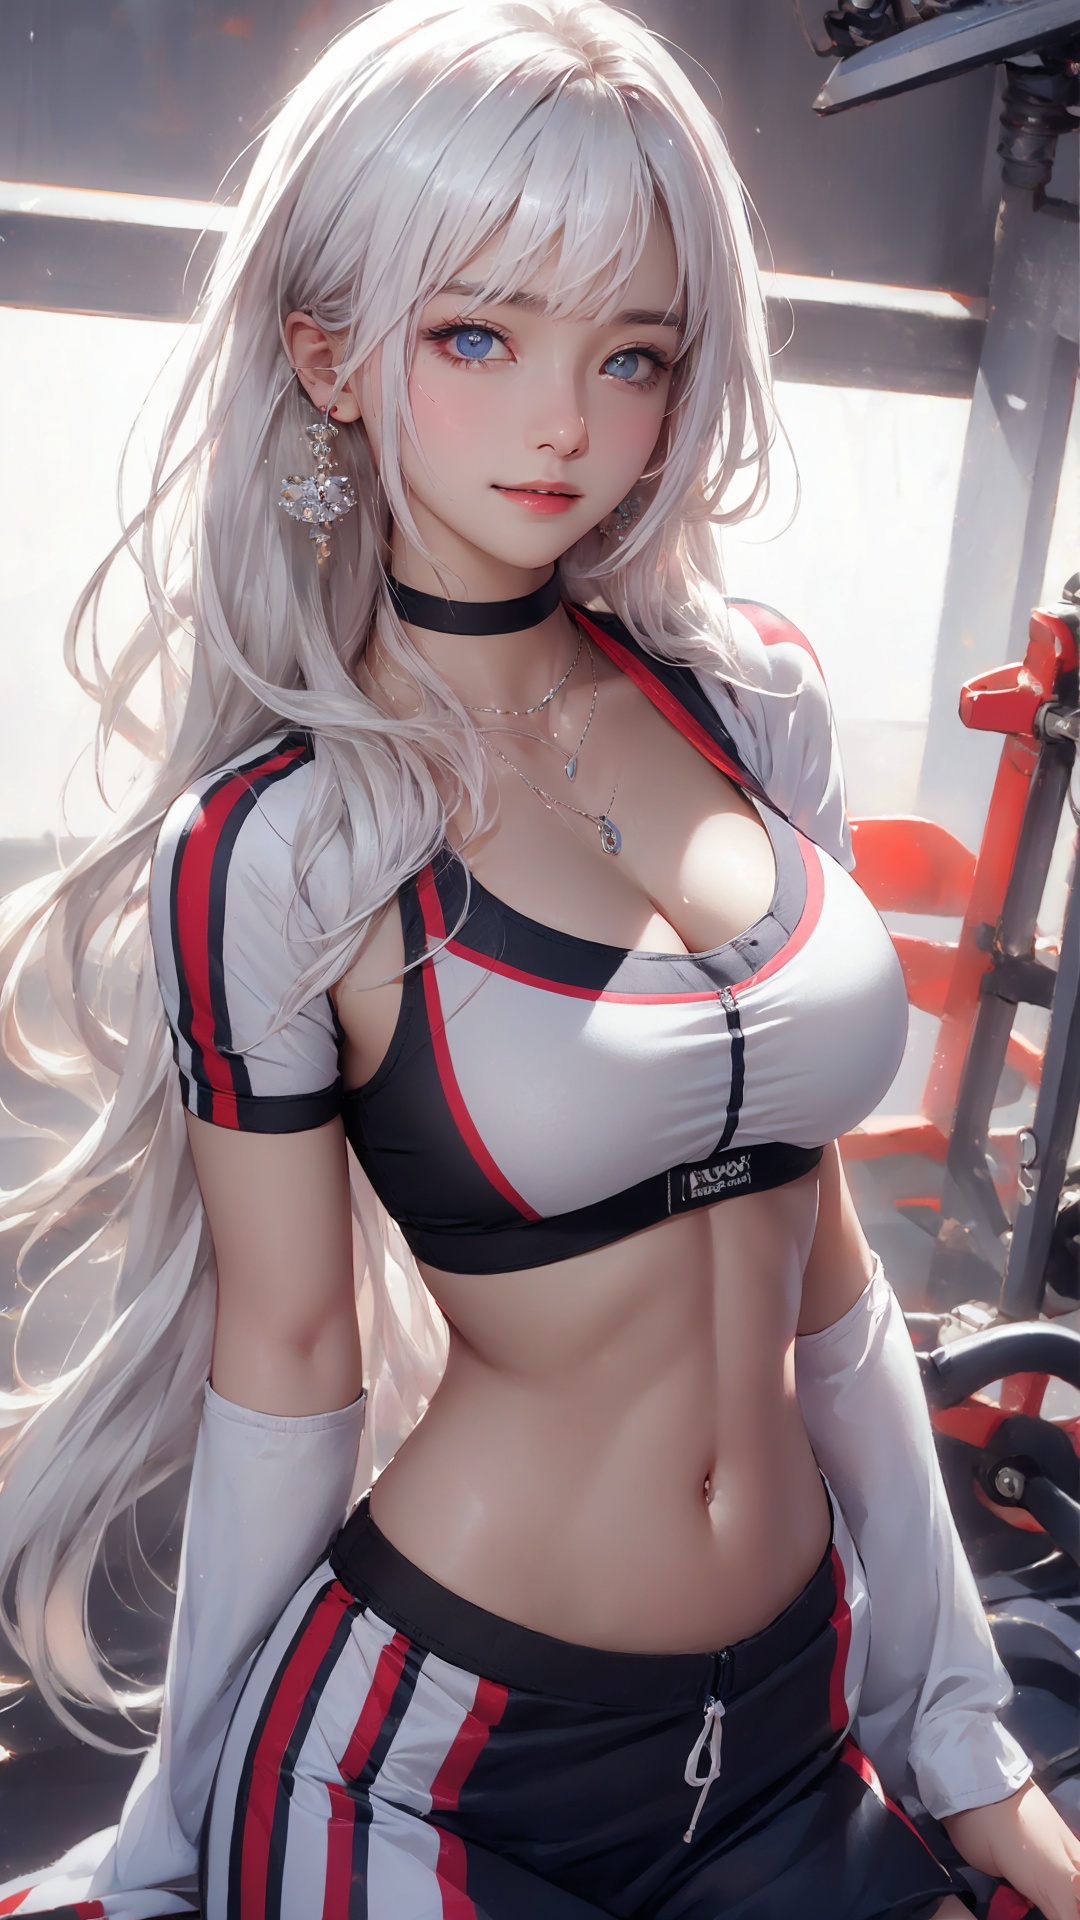 The highest image quality, RAW photogr, 超高分辨率, gently smiling, 16 years old Korean, Big breasts, Giant cleavage, Fair skin, Shiny white skin, a short bob, Light silver hair, Match neatly with bangs, Cropped T-shirt, track suit, running shorts, beautidful eyes, beautiful eyes of random colors, Very thin lips, beautiful eyes with details, Elongated eyes, pale pink cheeks, long eyelasher, beautiful double eyelid, eye shadows, Beautiful thin legs, Beautiful navel, Beautiful abs, Beautiful ribs, Earrings, choker necklace, Training room, gym,1 girl,tutult